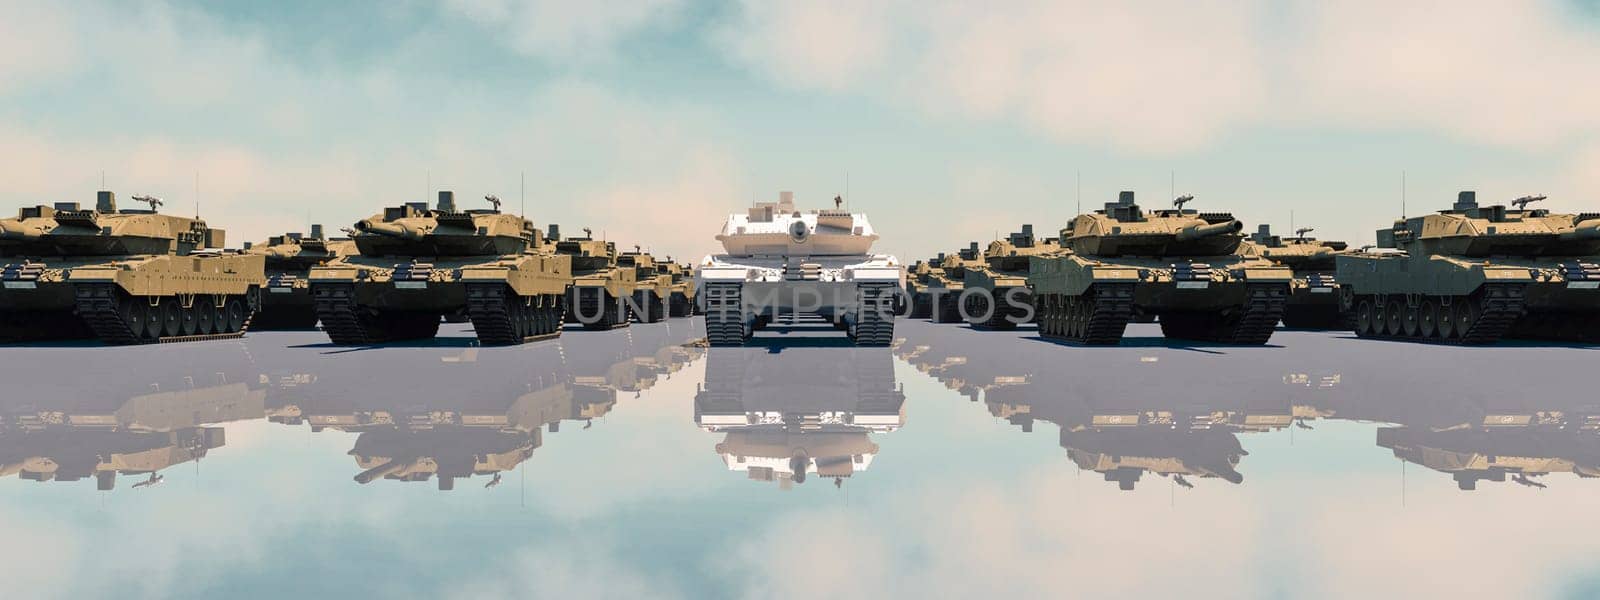 A row of modern tanks mirrored perfectly on a reflective surface, showcasing military precision and readiness